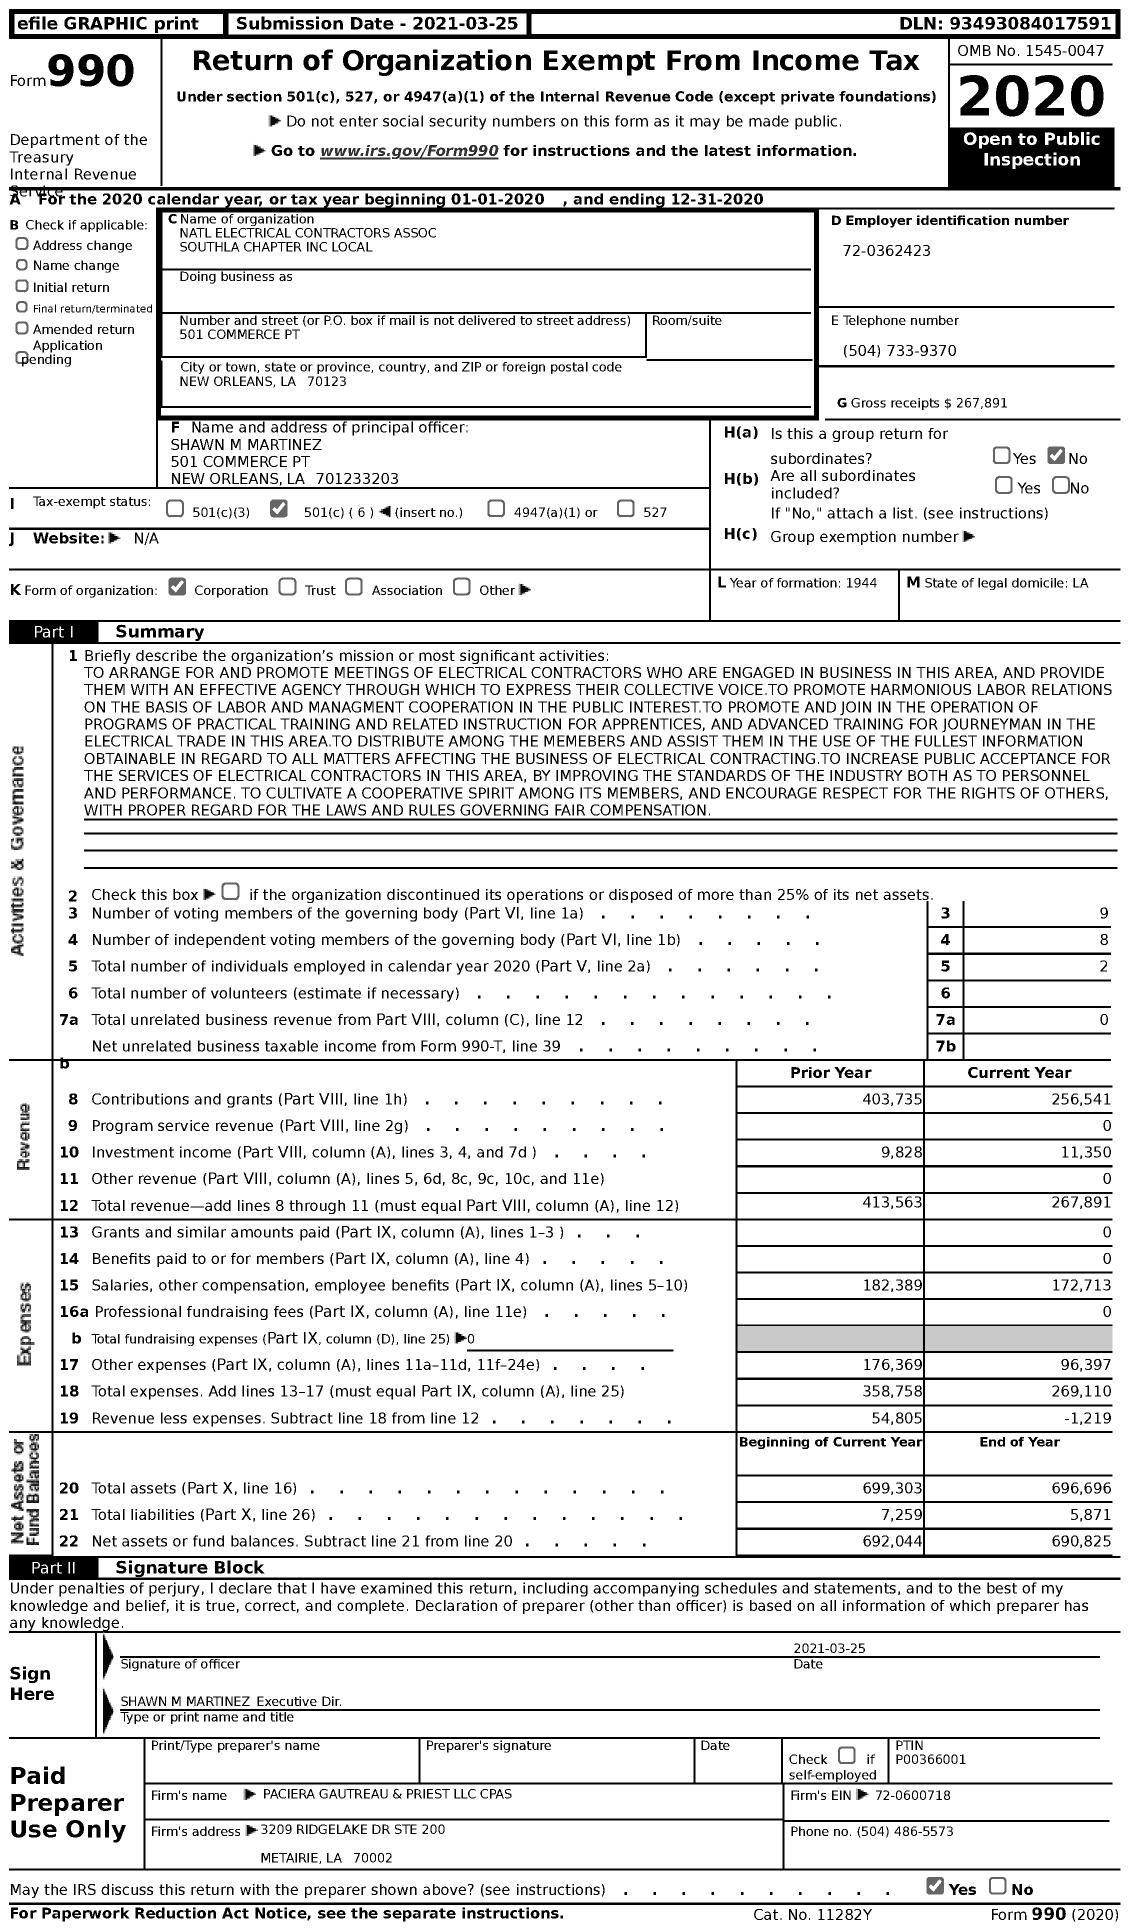 Image of first page of 2020 Form 990 for National Electrical Contractors Association Southla Chapter Local